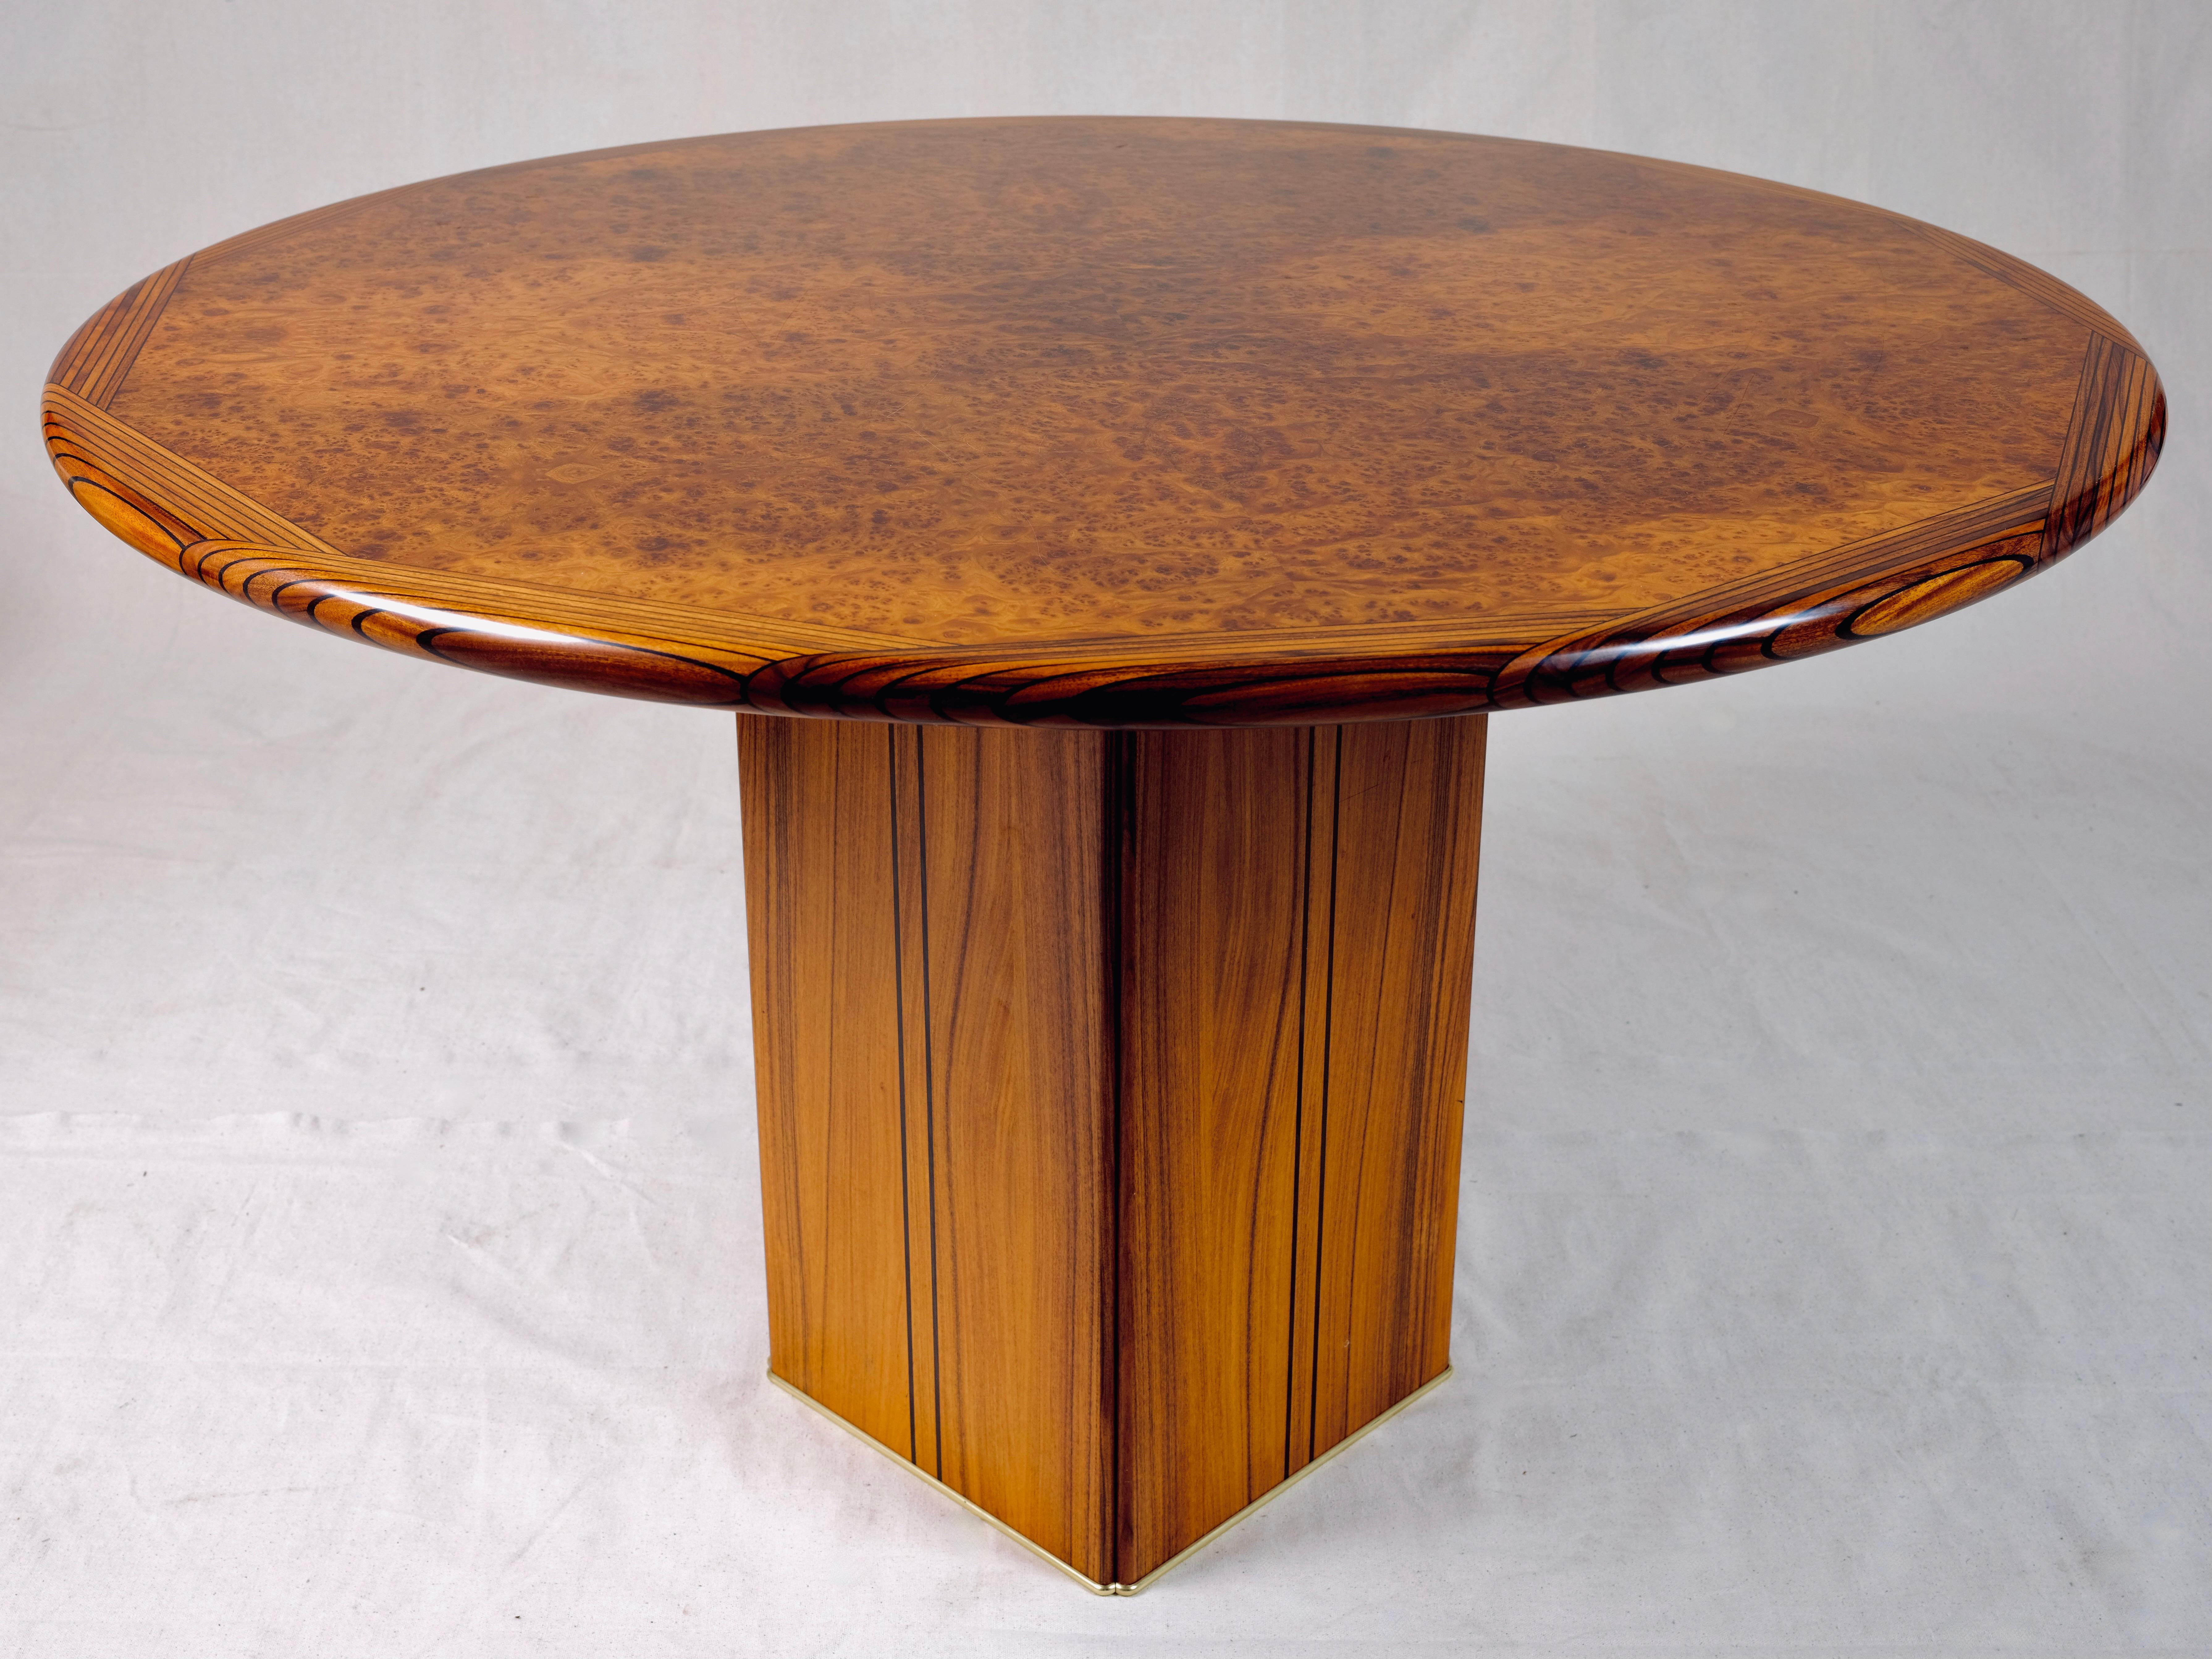 The ‘Africa’ or 'Artona' table was designed by Tobia & Afra Scarpa in the 1975.

This table is of historical significance, being a part of the very first design series to come from Max Alto in 1975.

Italian burl walnut top with ebonized inlay